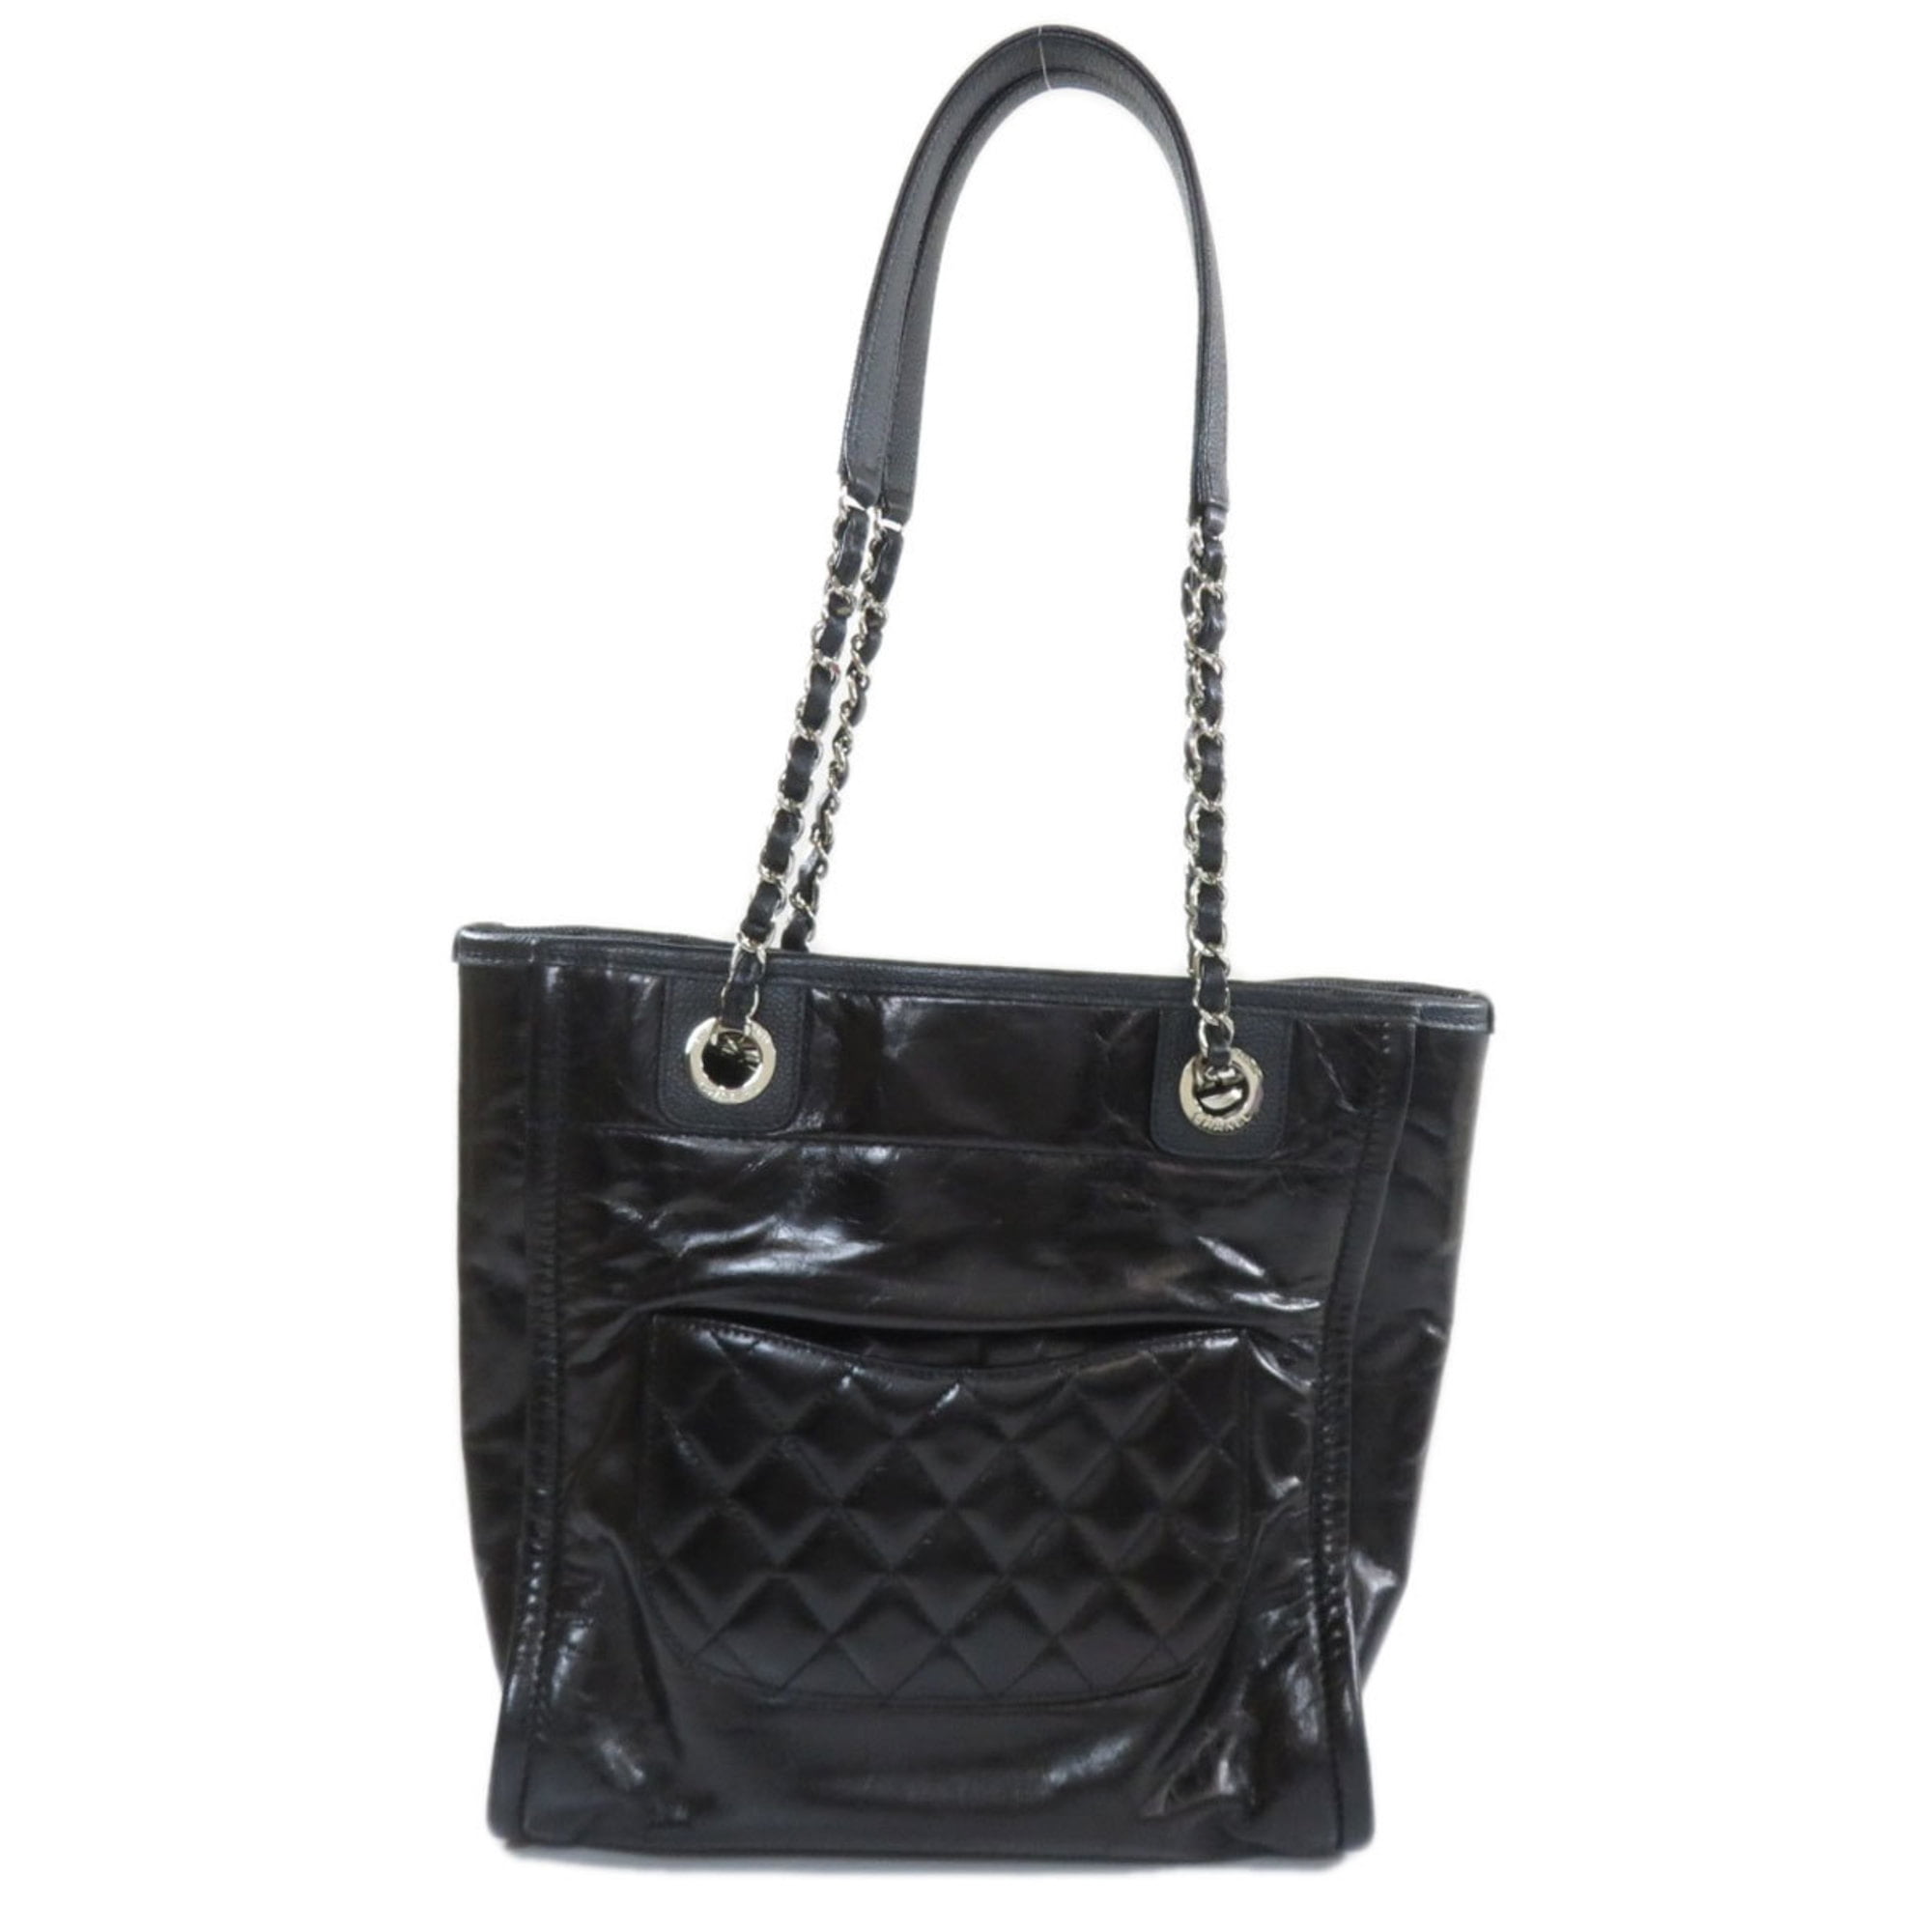 Chanel Deauville Medium Calfskin Leather Tote Bag